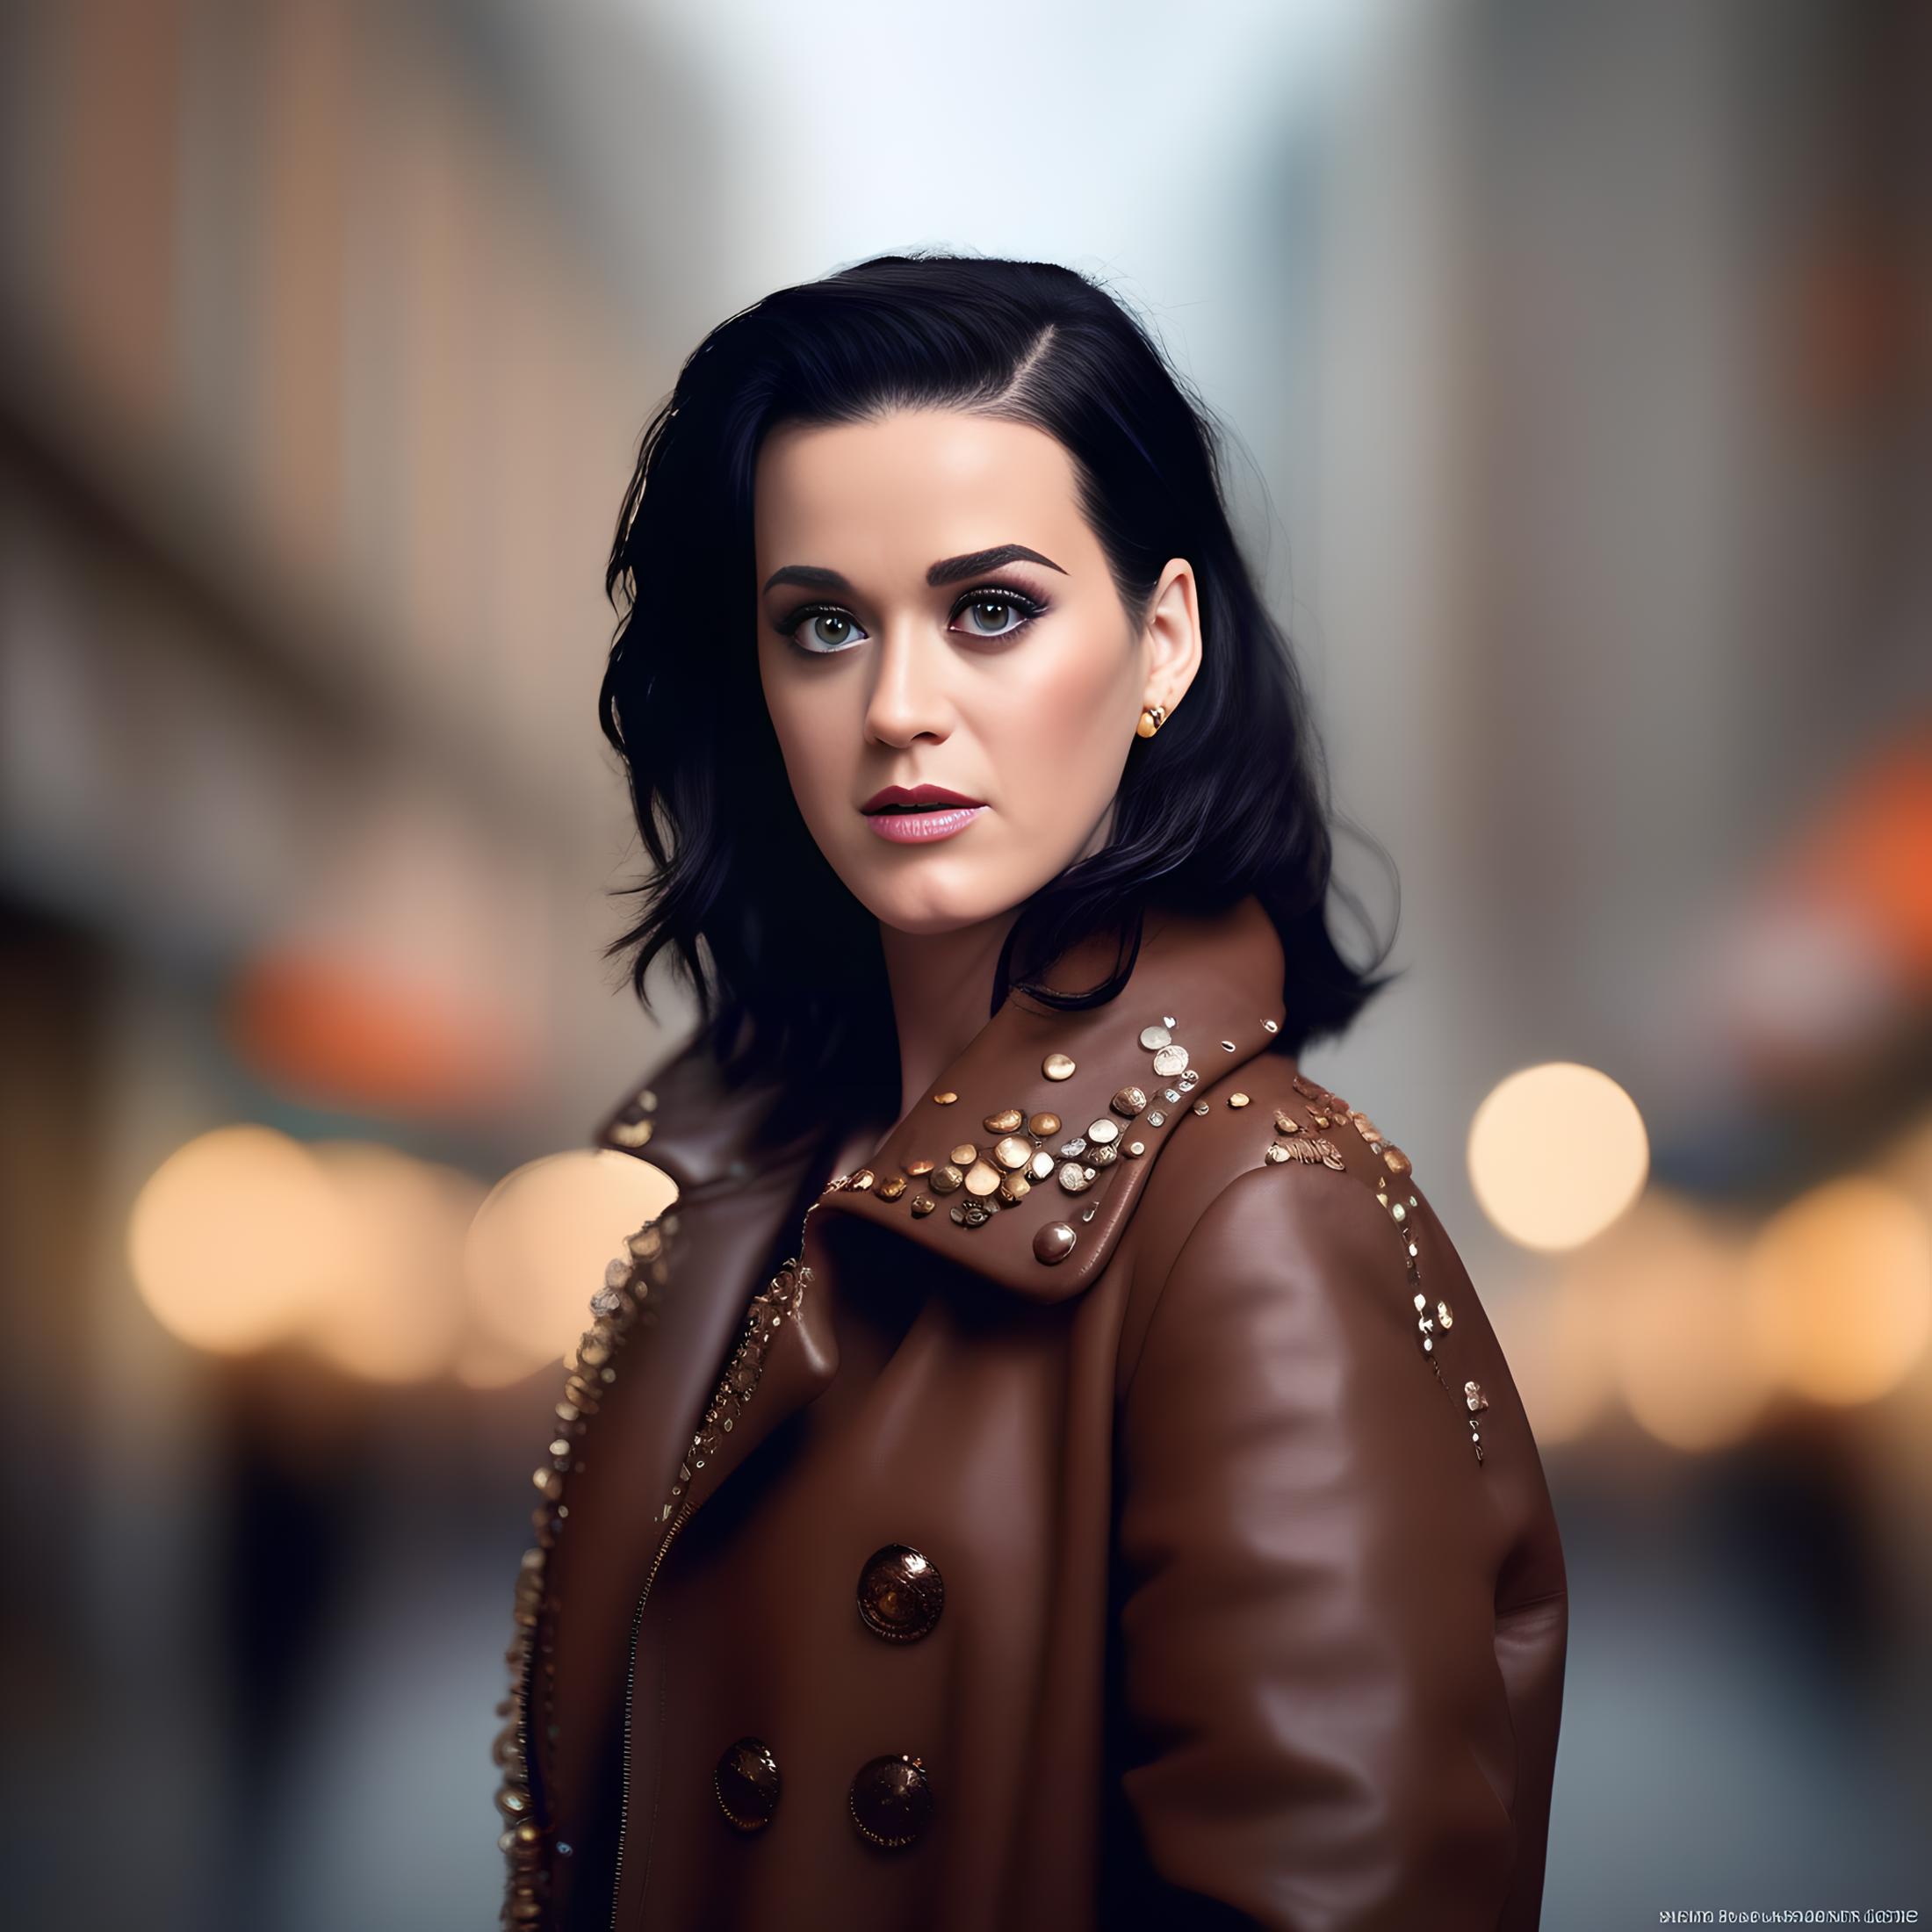 Katy Perry image by parar20